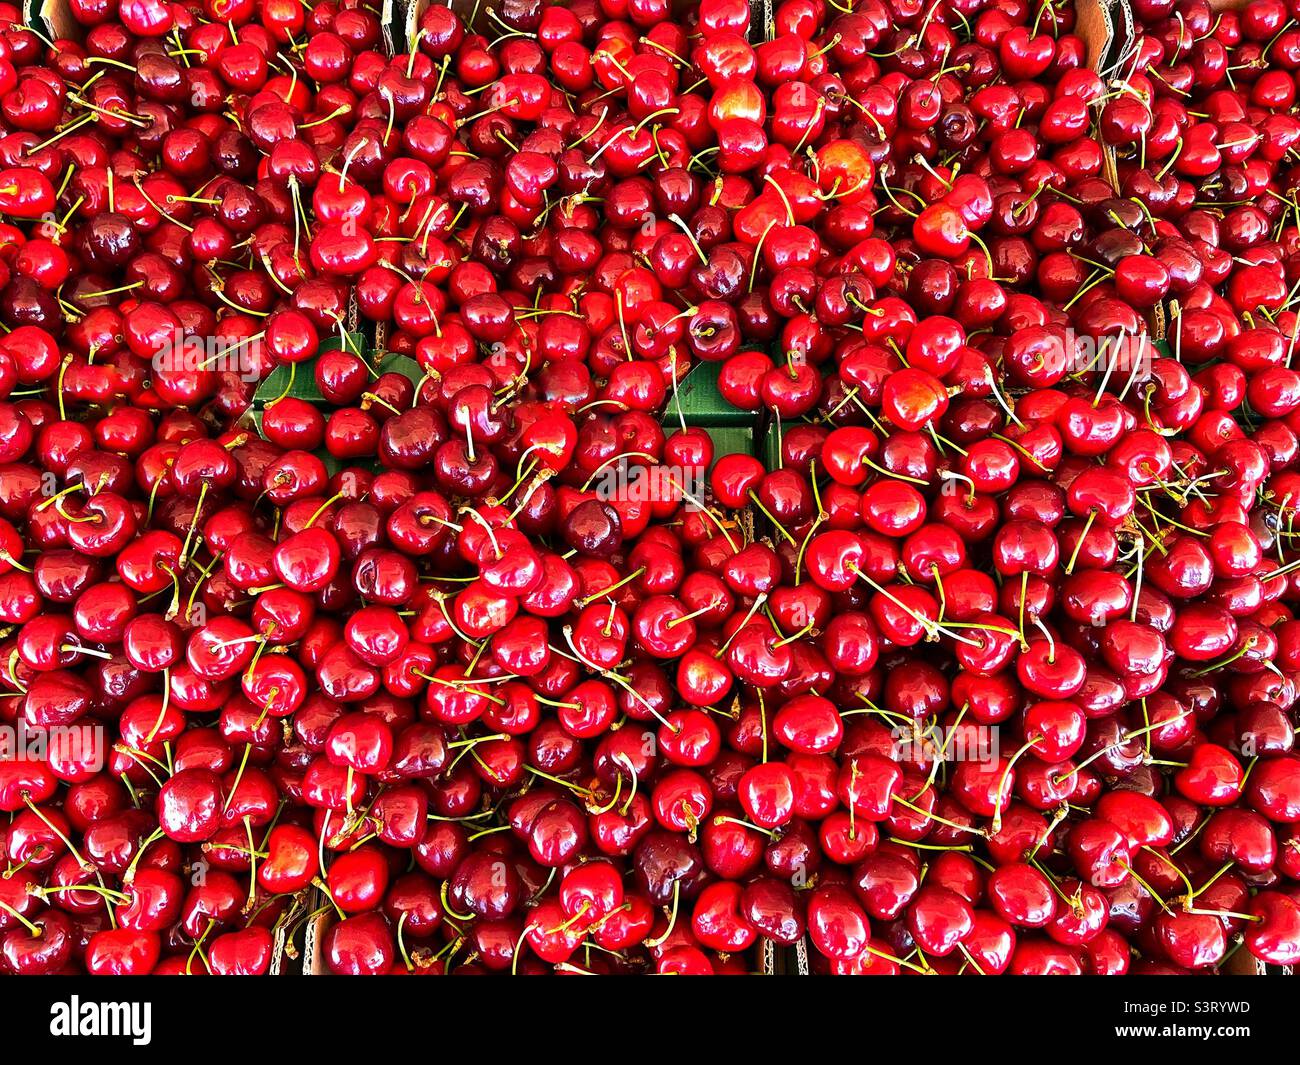 Close up view of a tray of fresh ripe cherries on a market stall. No people. Backgrounds. Stock Photo